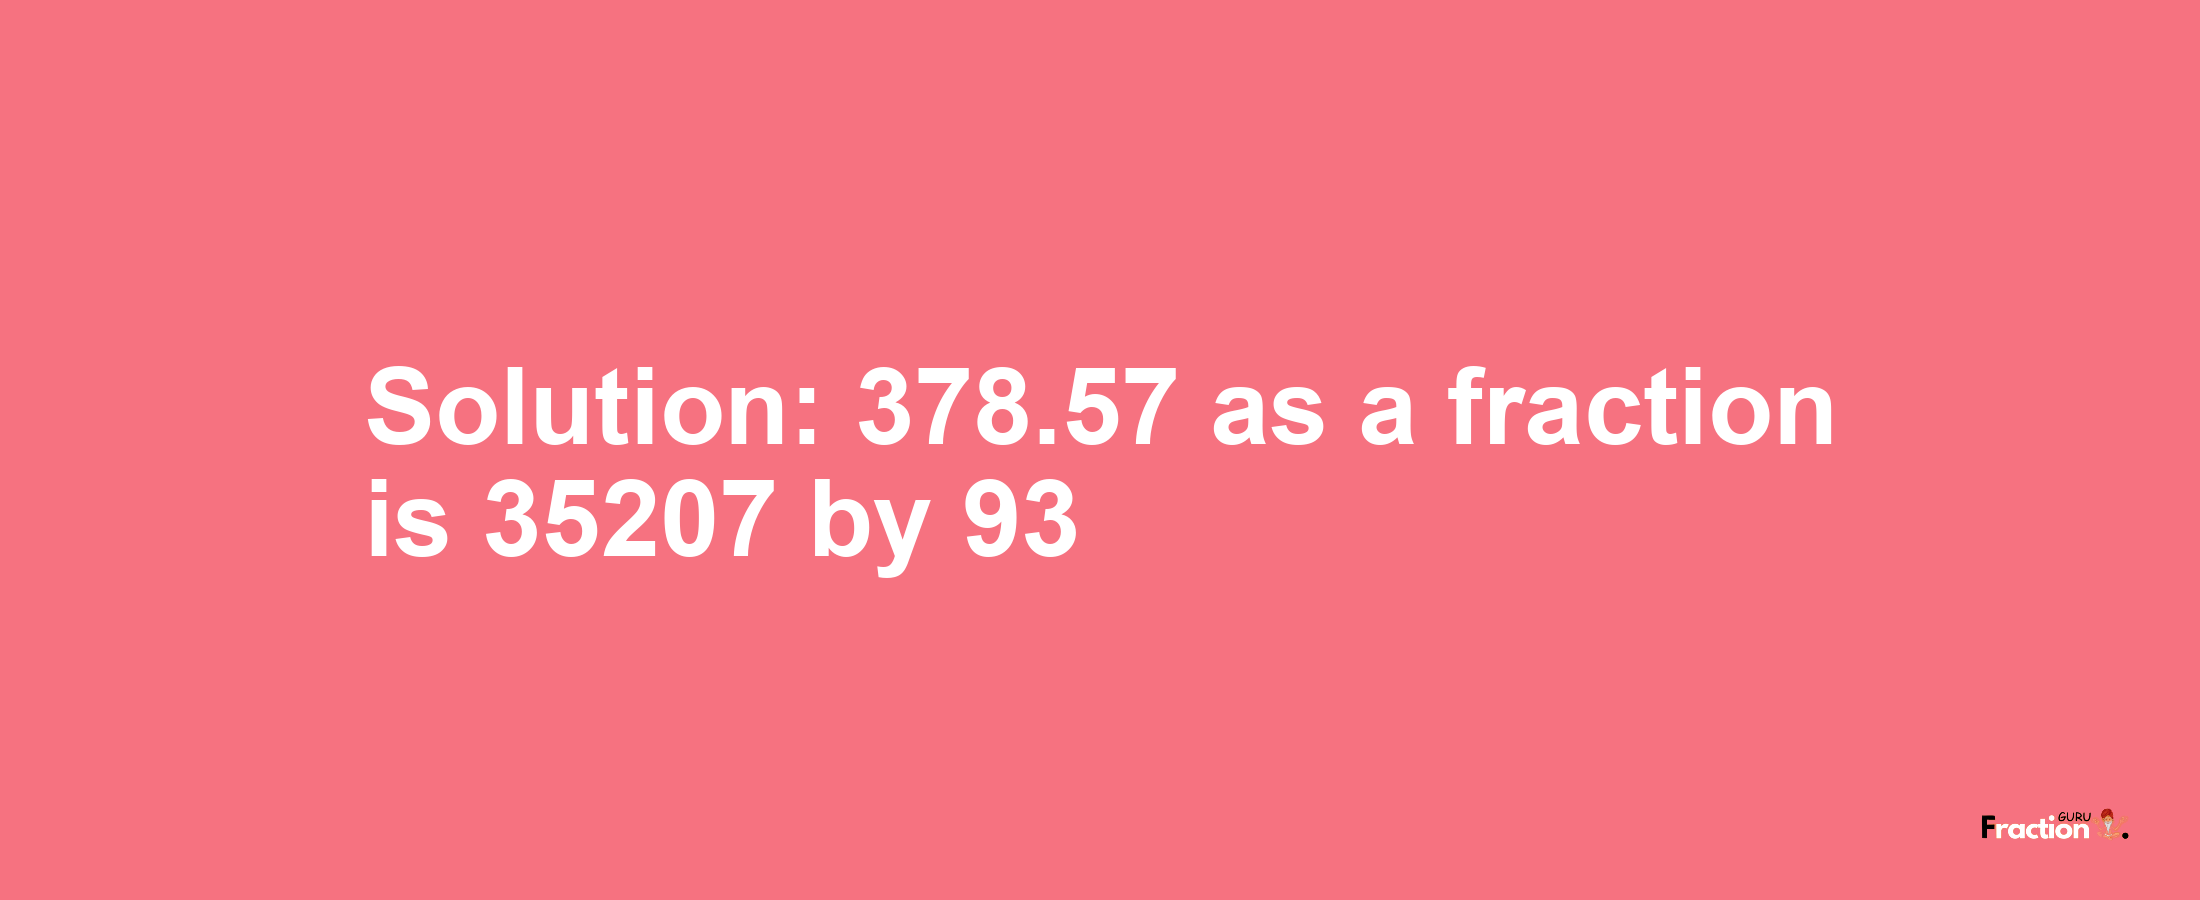 Solution:378.57 as a fraction is 35207/93